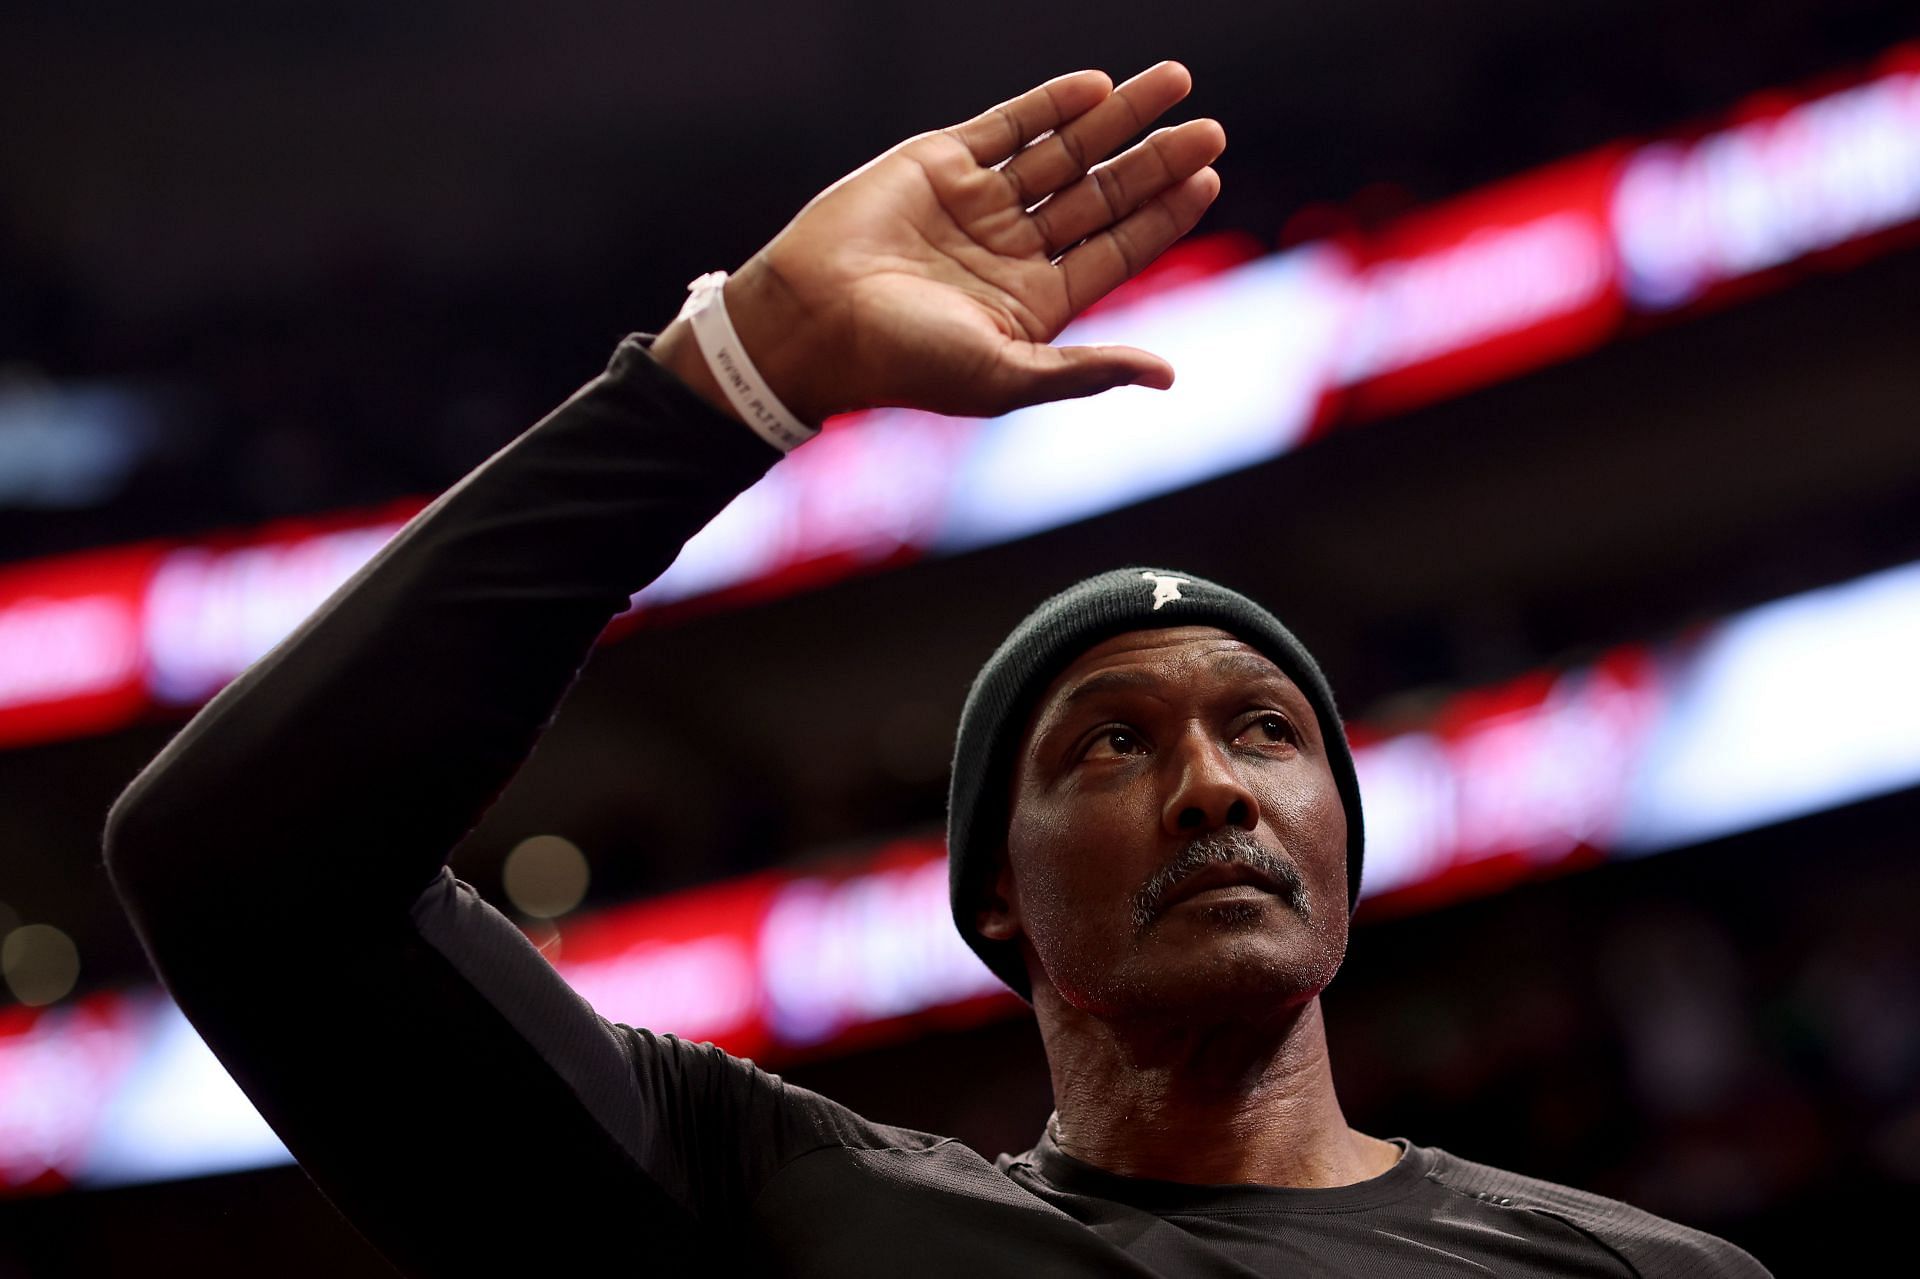 Karl Malone Has Heard The Criticism Over Getting a 13-Year-Old